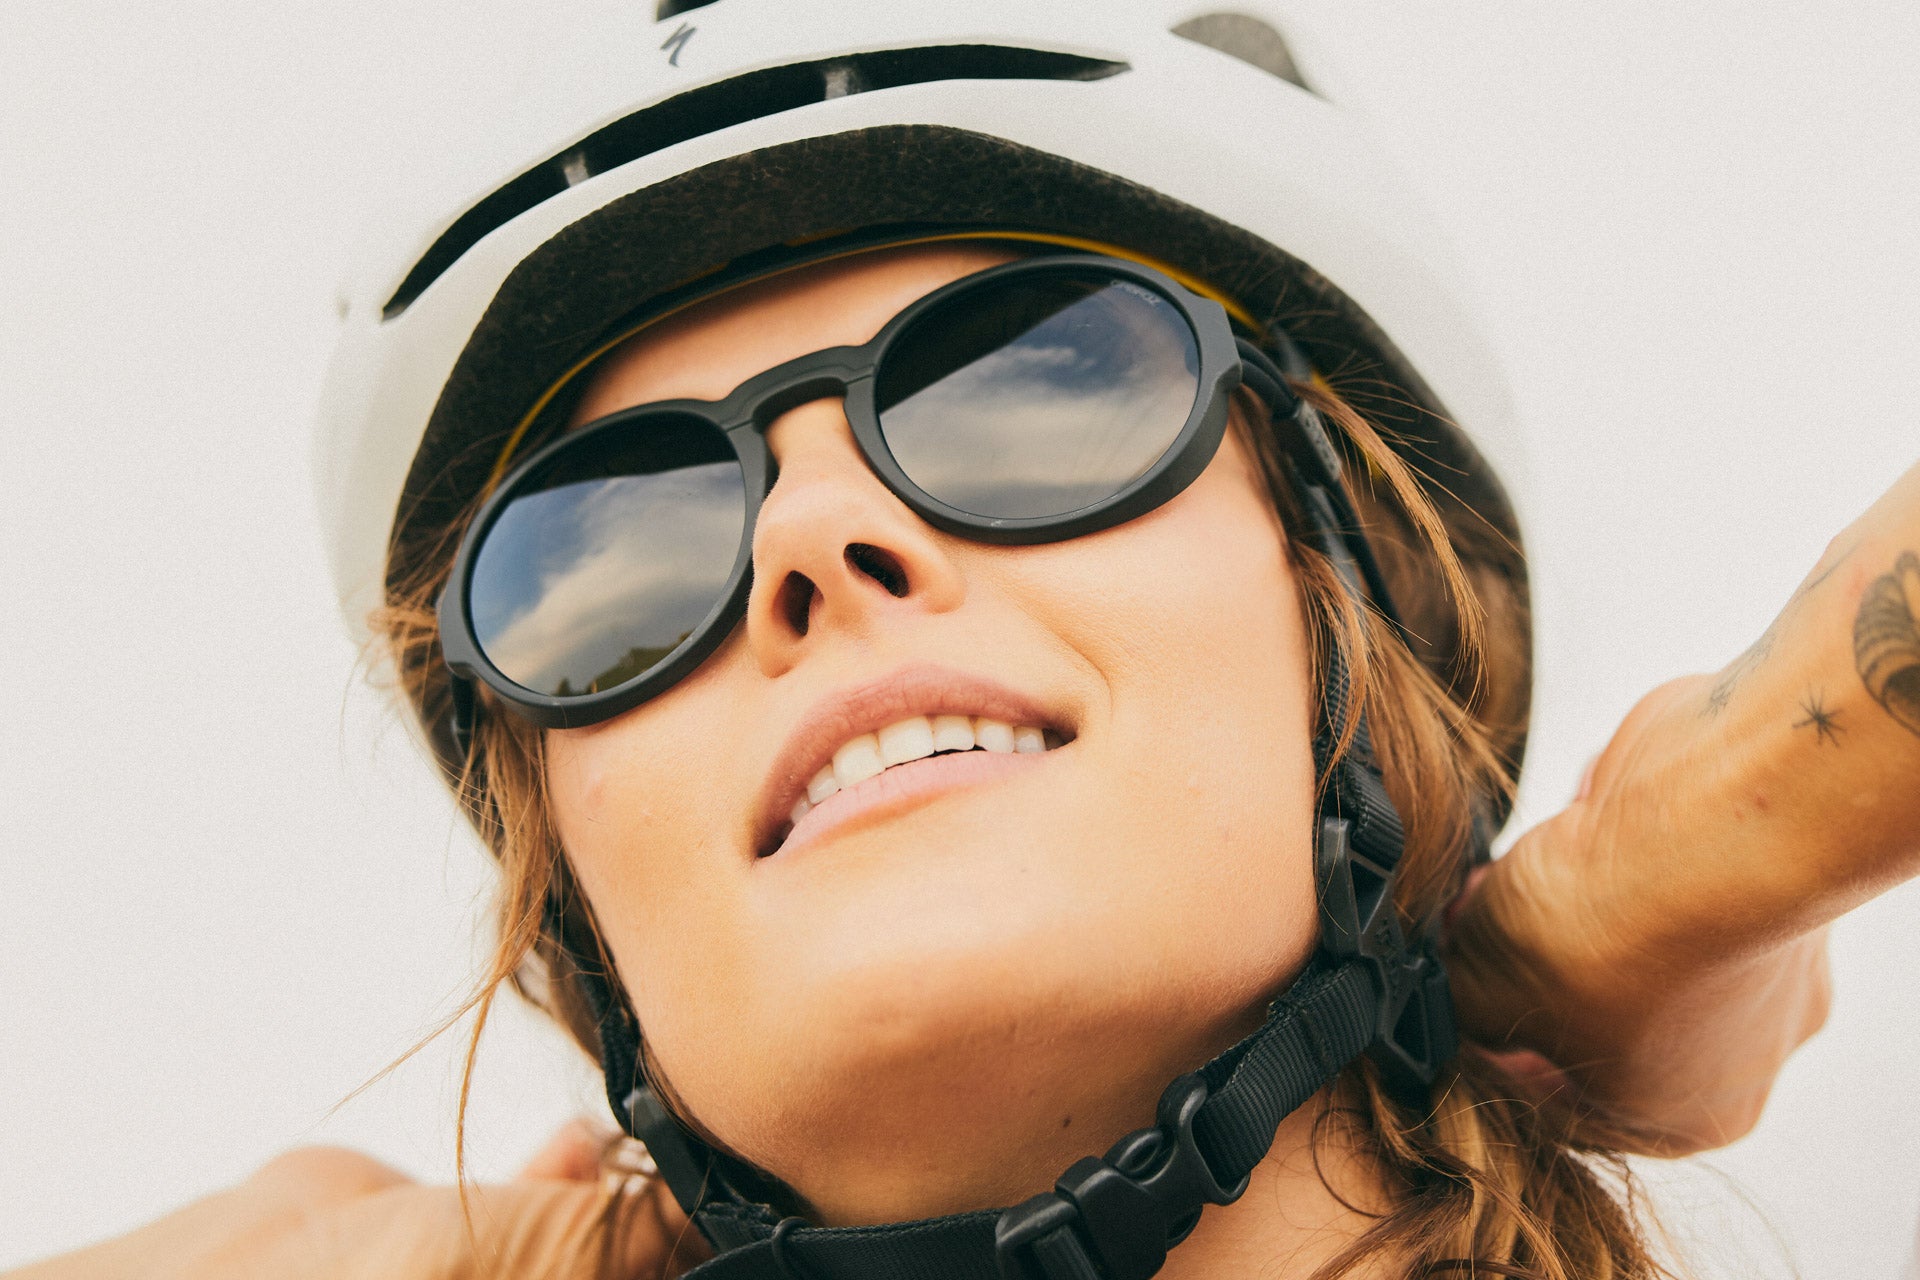 VIALE_CHARCOAL_GREY Close up of woman in a helmet looking up wearing Ombraz viale unisex armless string sunglasses